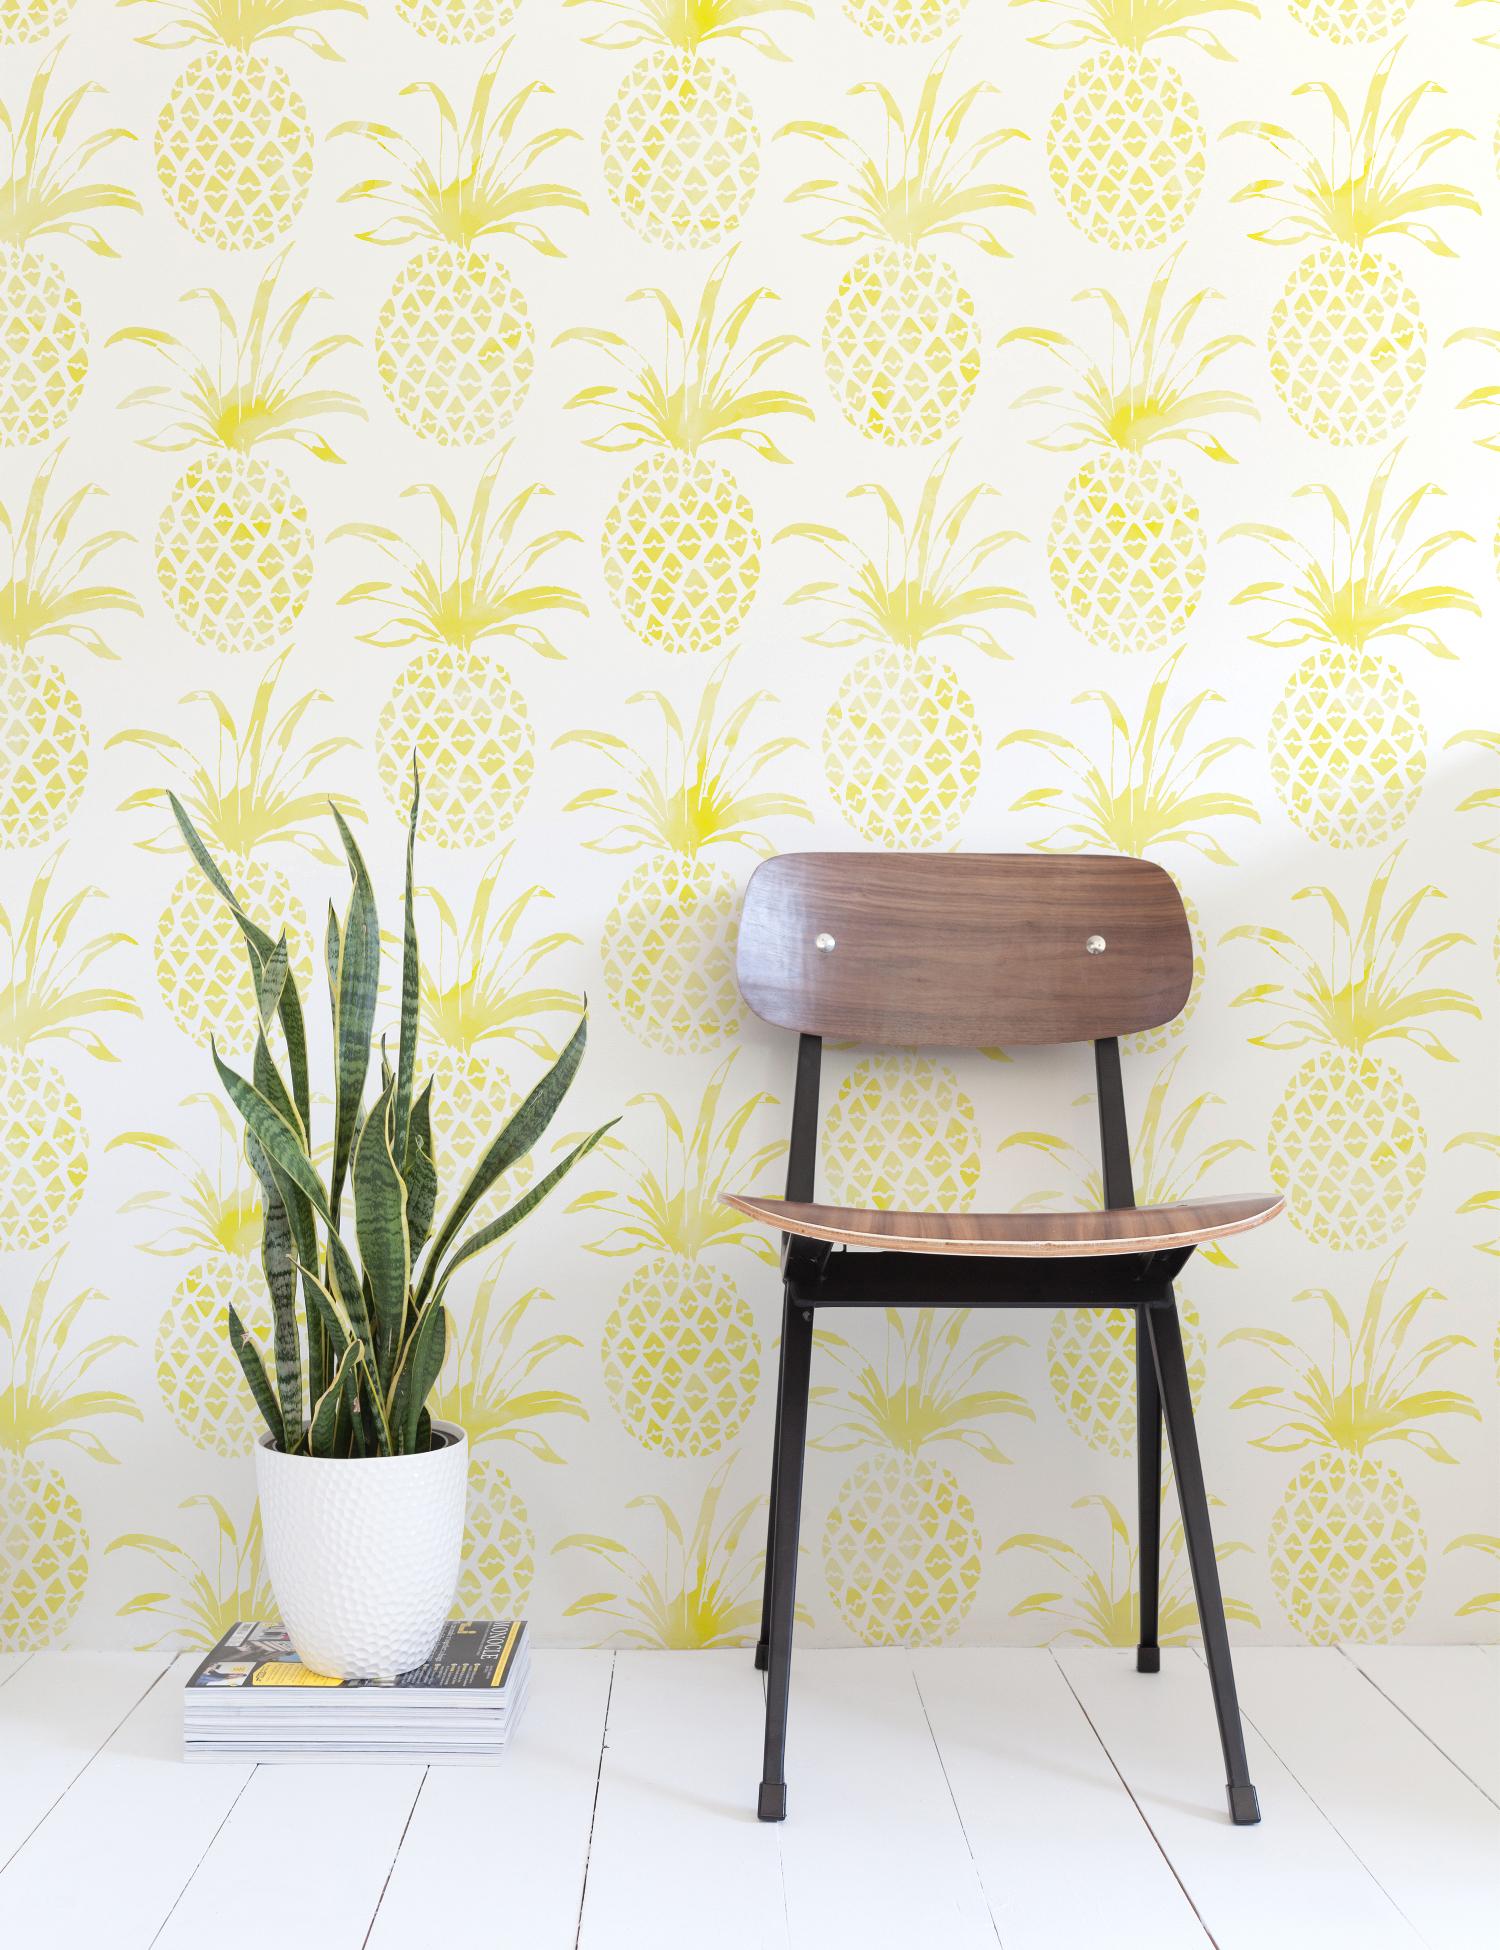 The tropical feeling of Piña Pintada wallpaper is sure to remind you of the islands, all year long.

Samples are available for $18 including US shipping, please message us to purchase.

Printing: Digital pigment print (minimum order of 4 rolls).